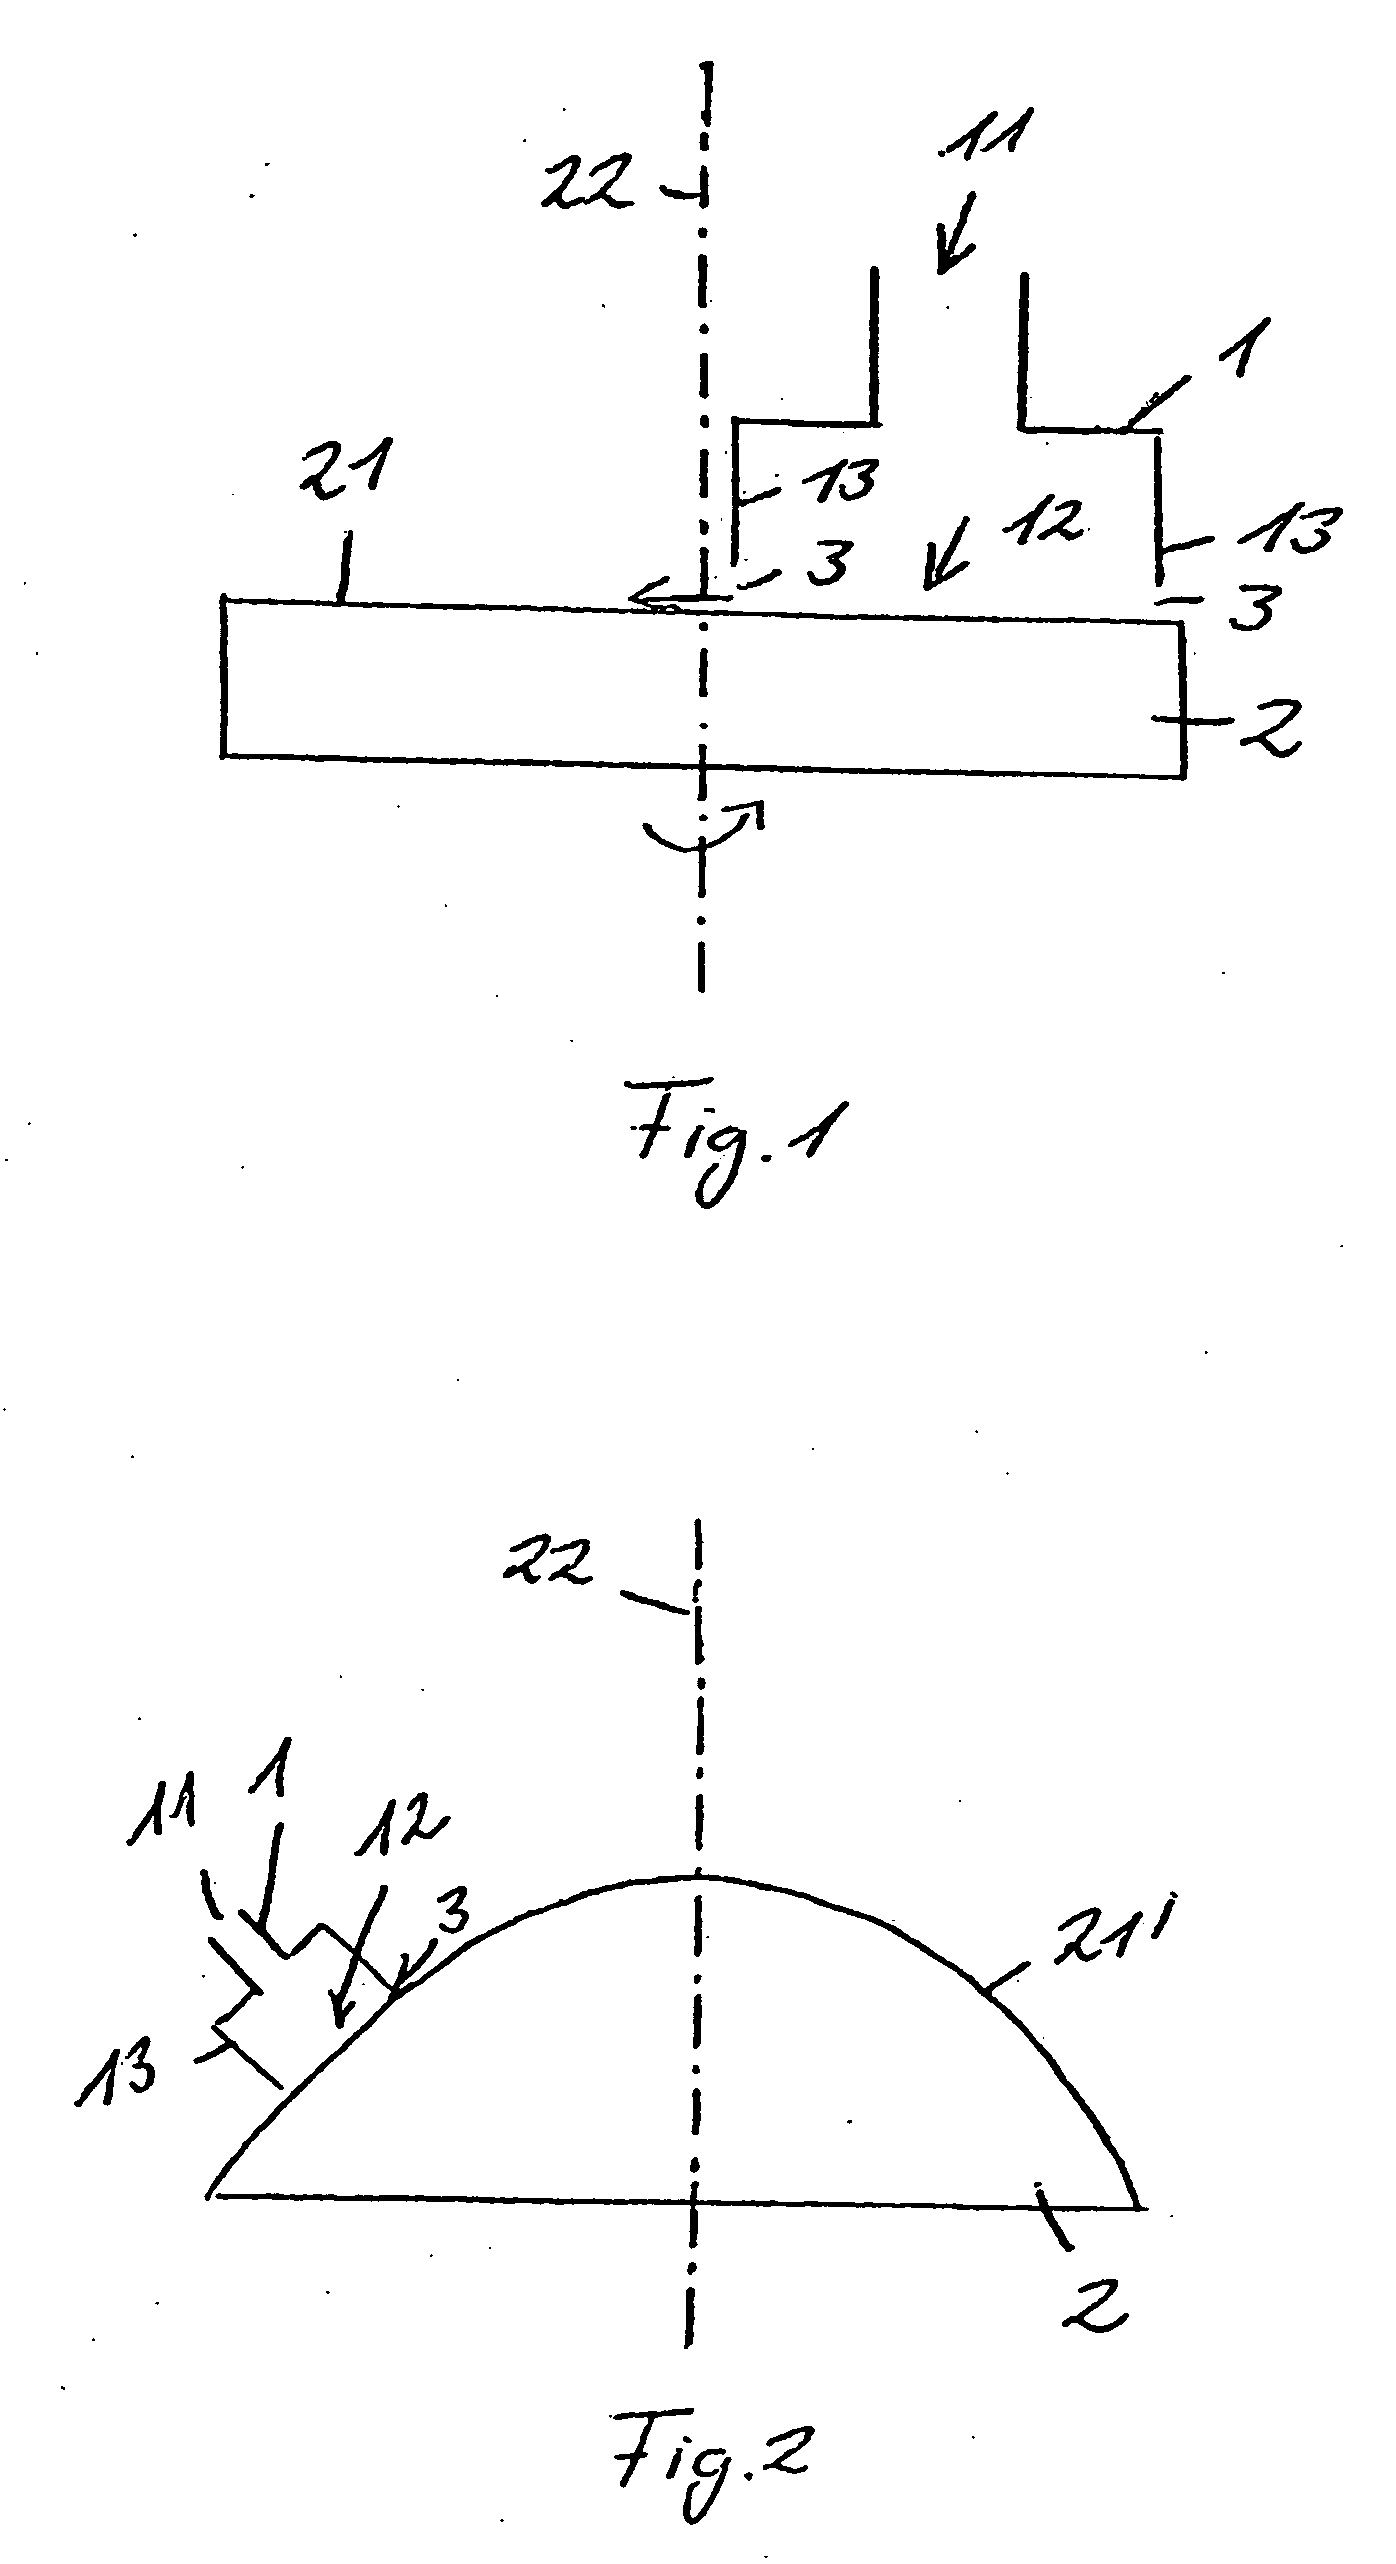 Device for the abrasive machining of surfaces of elements and in particular optical elements or workpieces